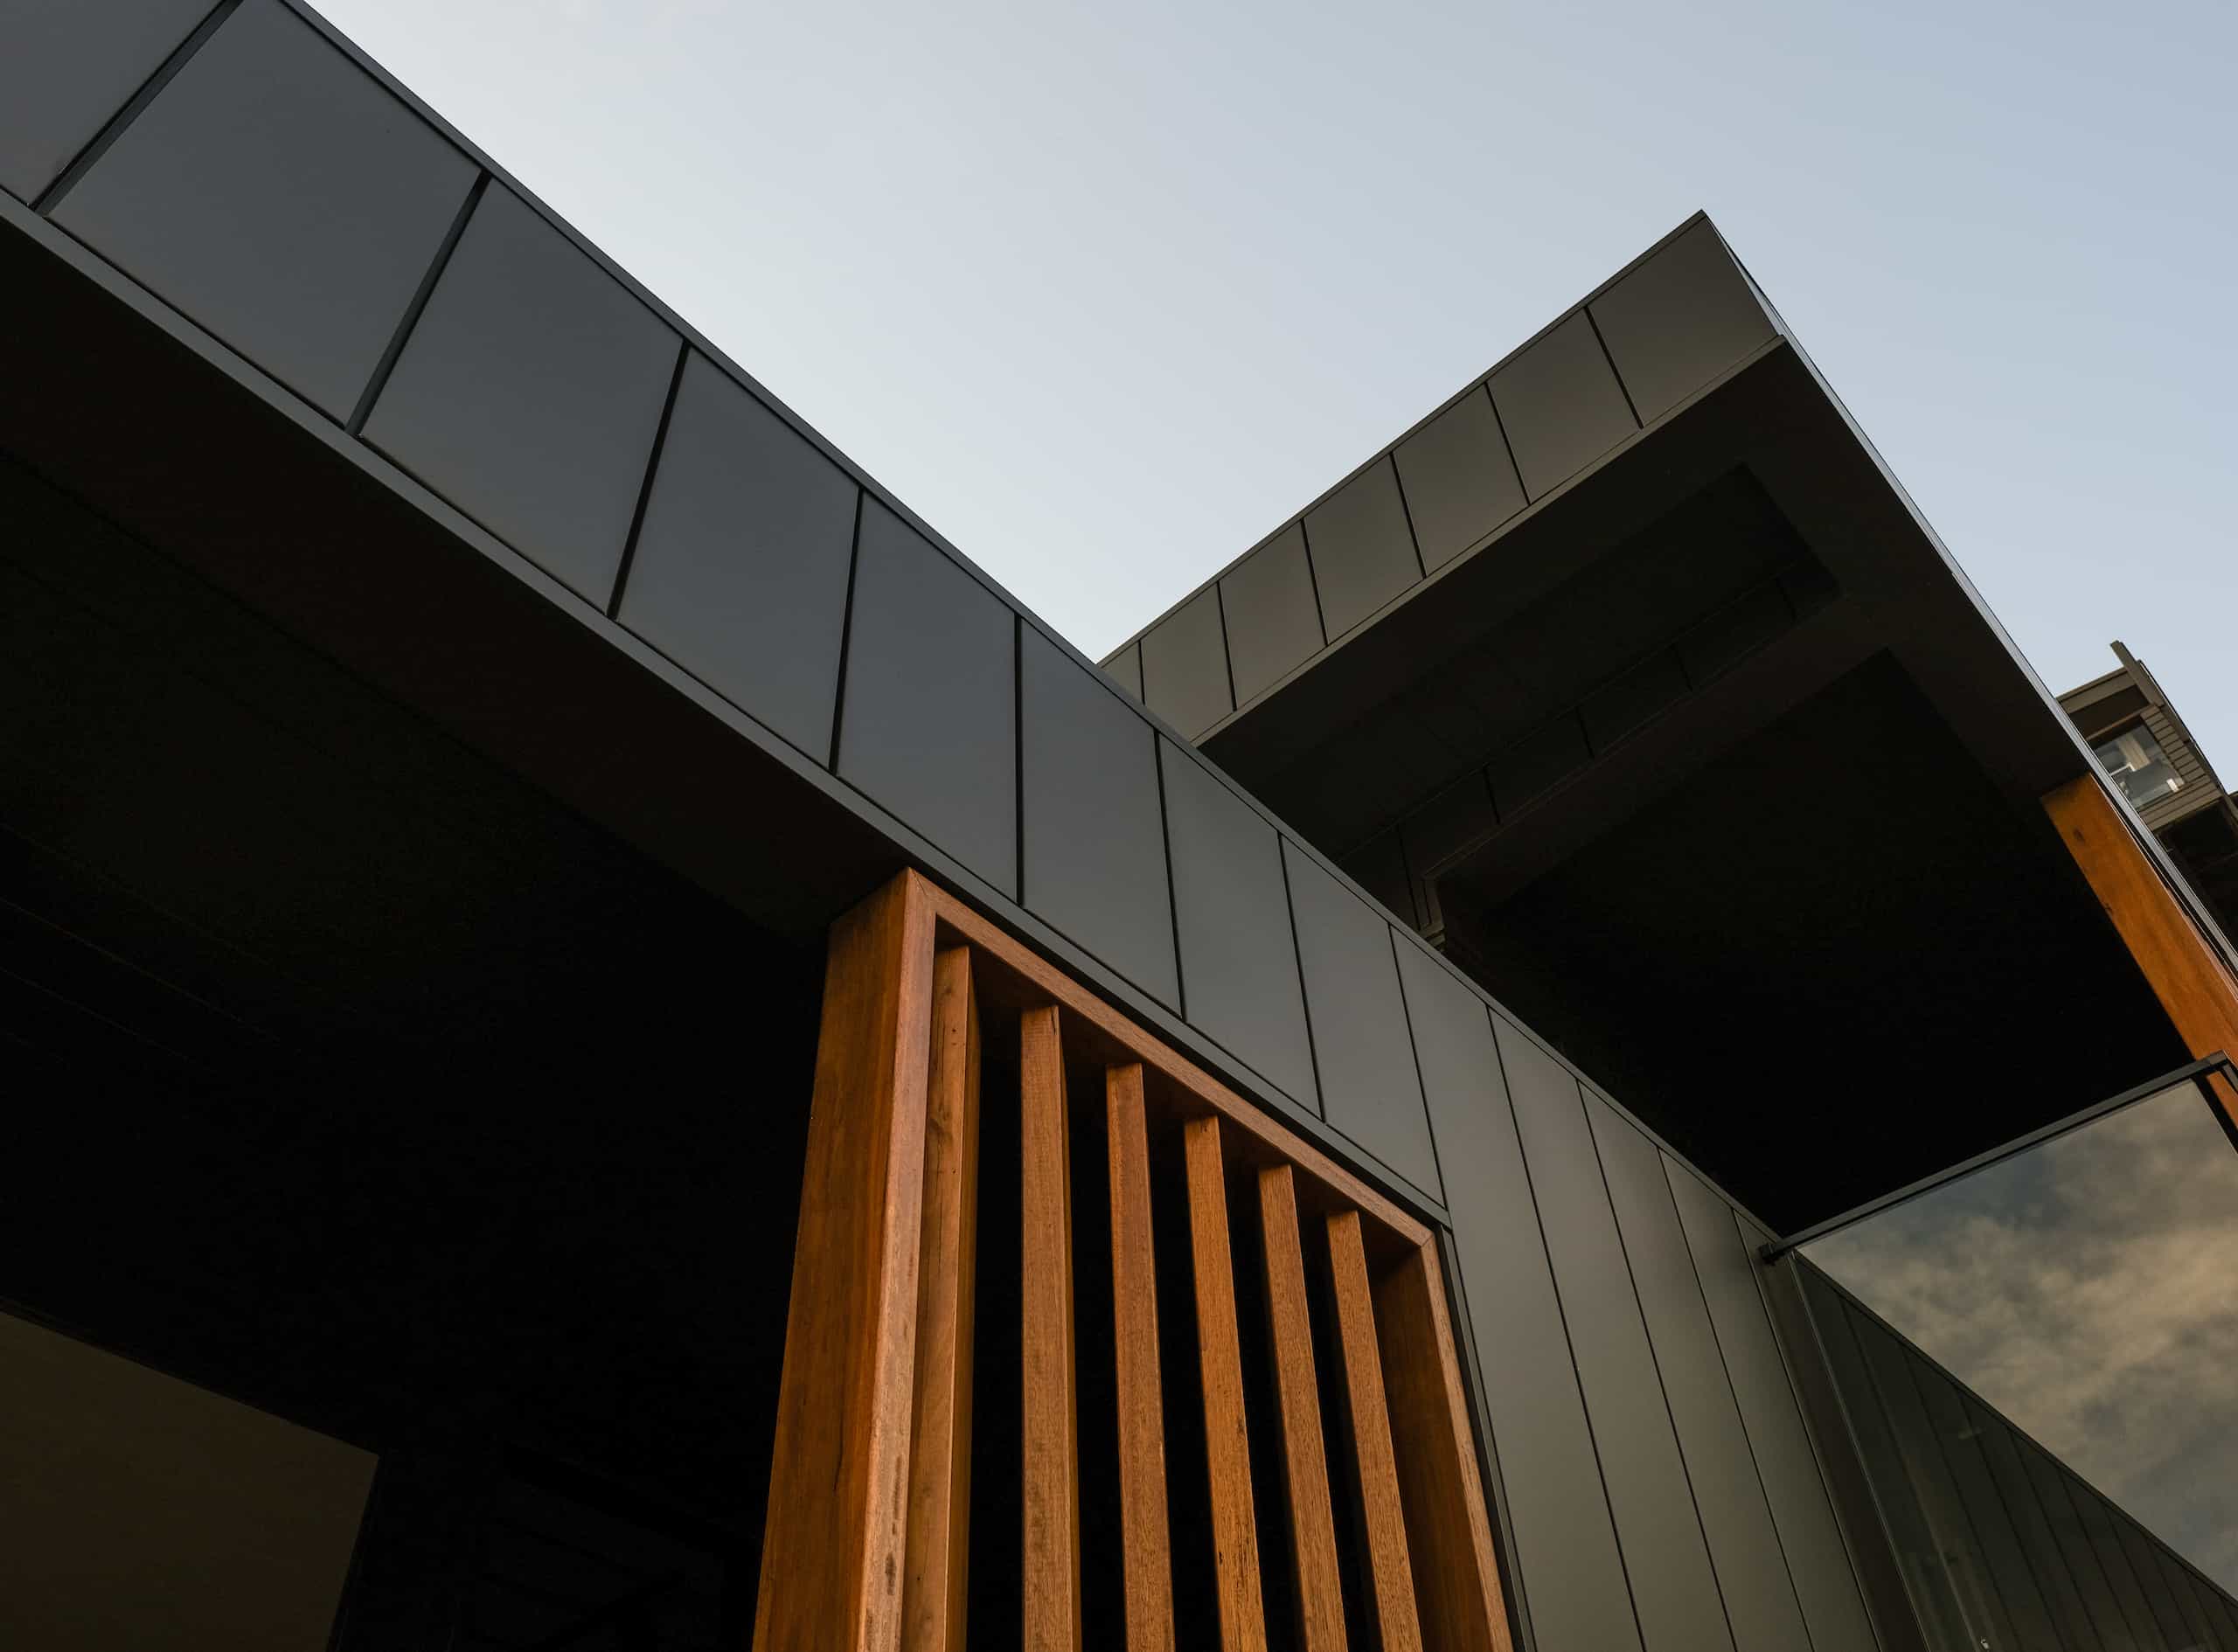 Interlocking Panels On Seaforth Property Compliments The Wood Perfectly